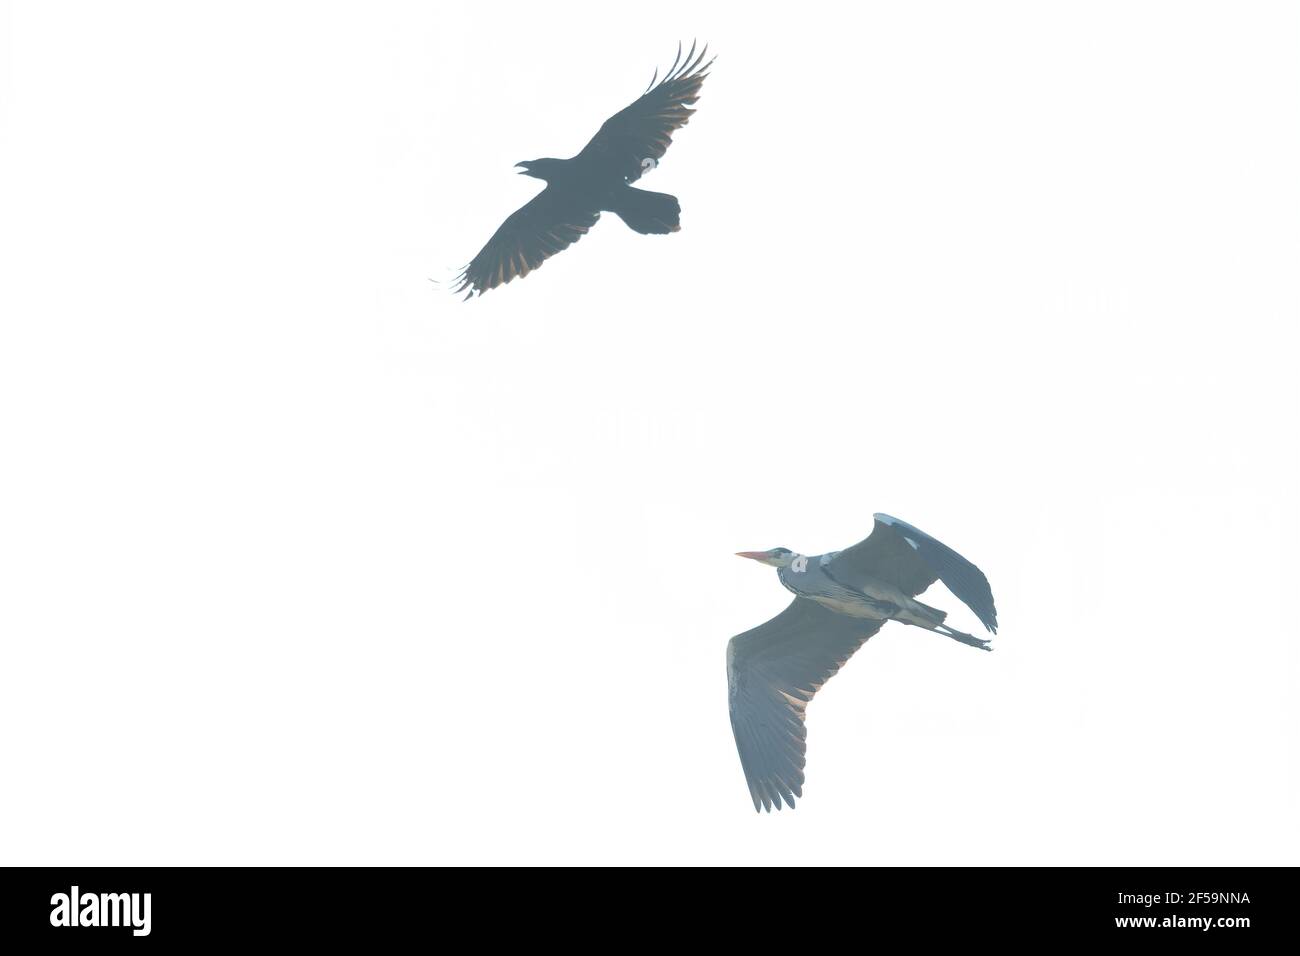 A northern Raven( Corvus corax) flying and attacking a grey heron aggressively. Stock Photo